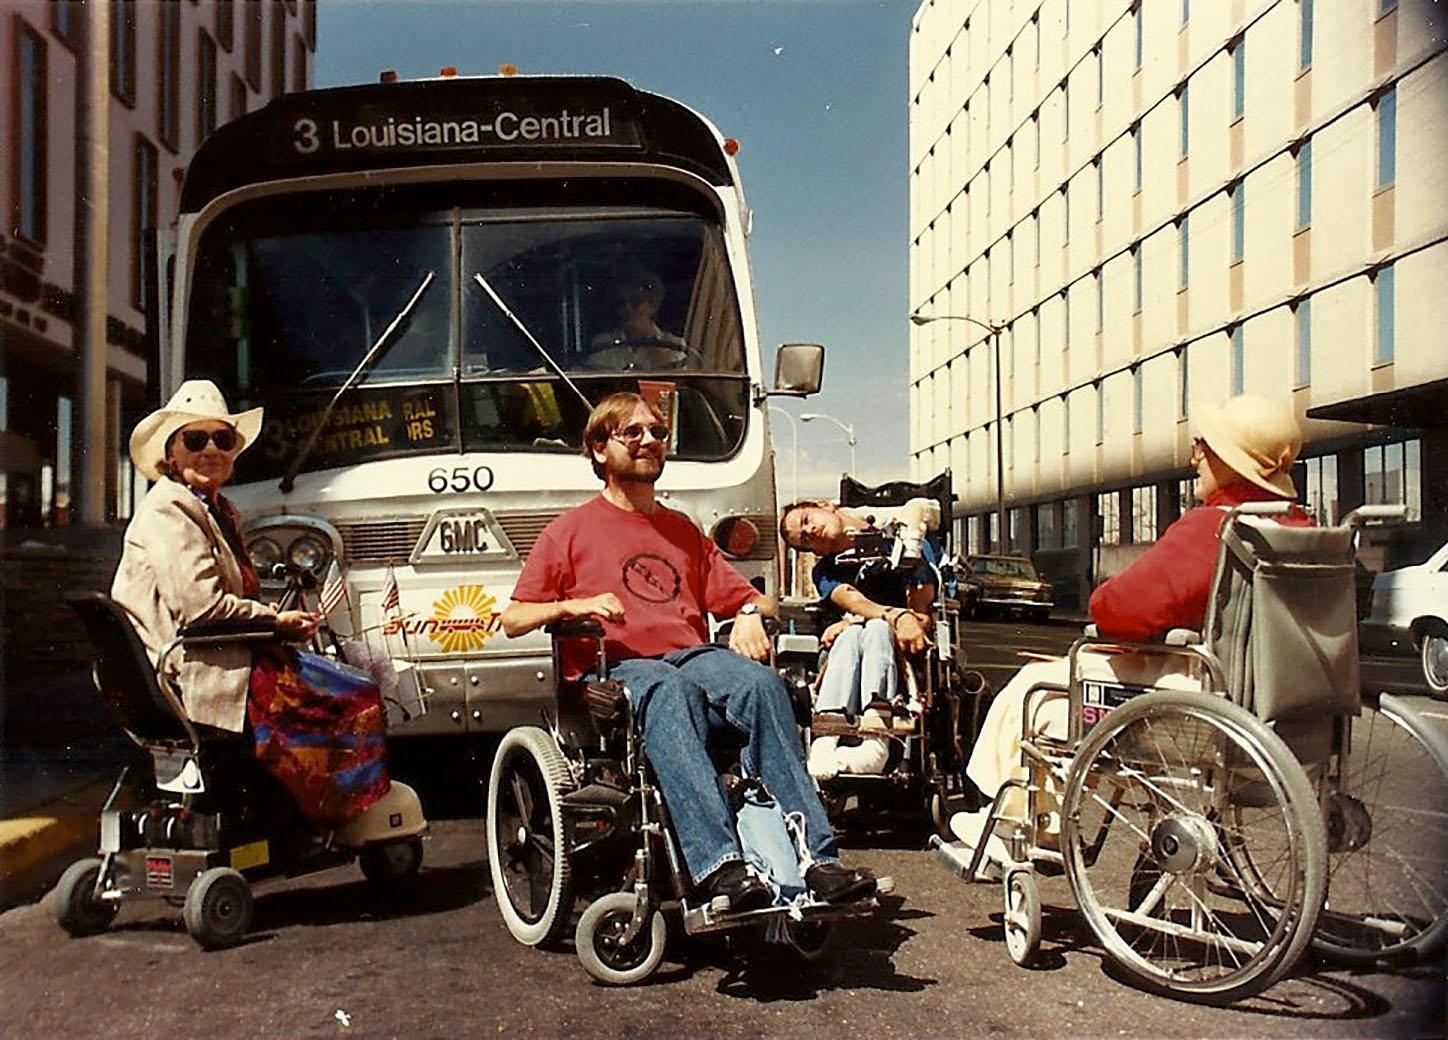 Gene blocks bus with 3 other protesters in wheelchairs